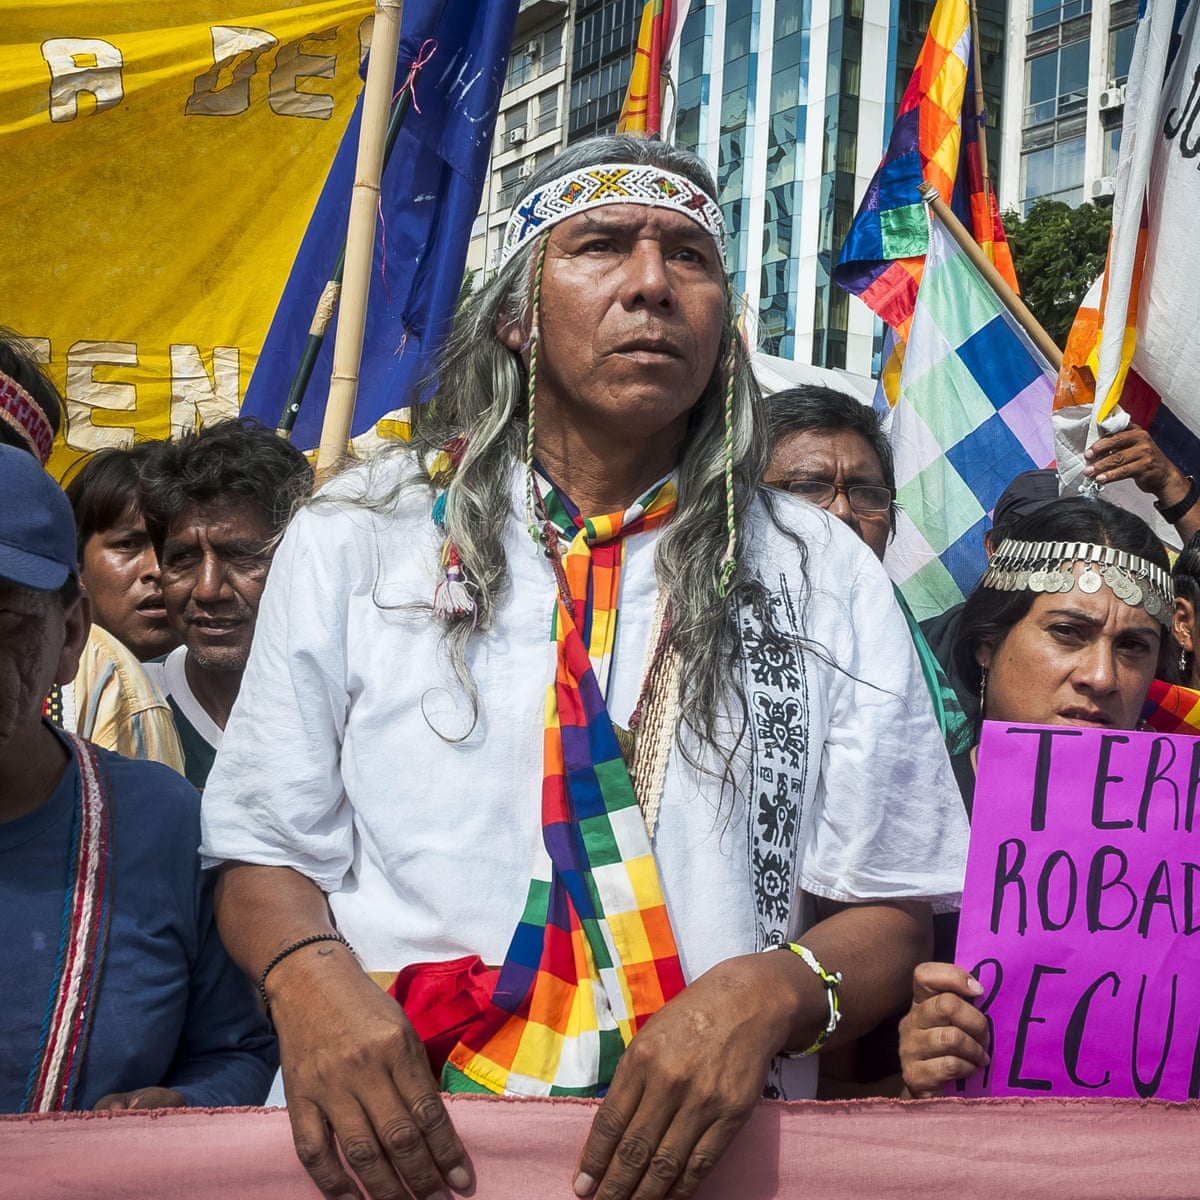 Argentina indigenous chieftain leads fight to reclaim ancestral land | Argentina | The Guardian